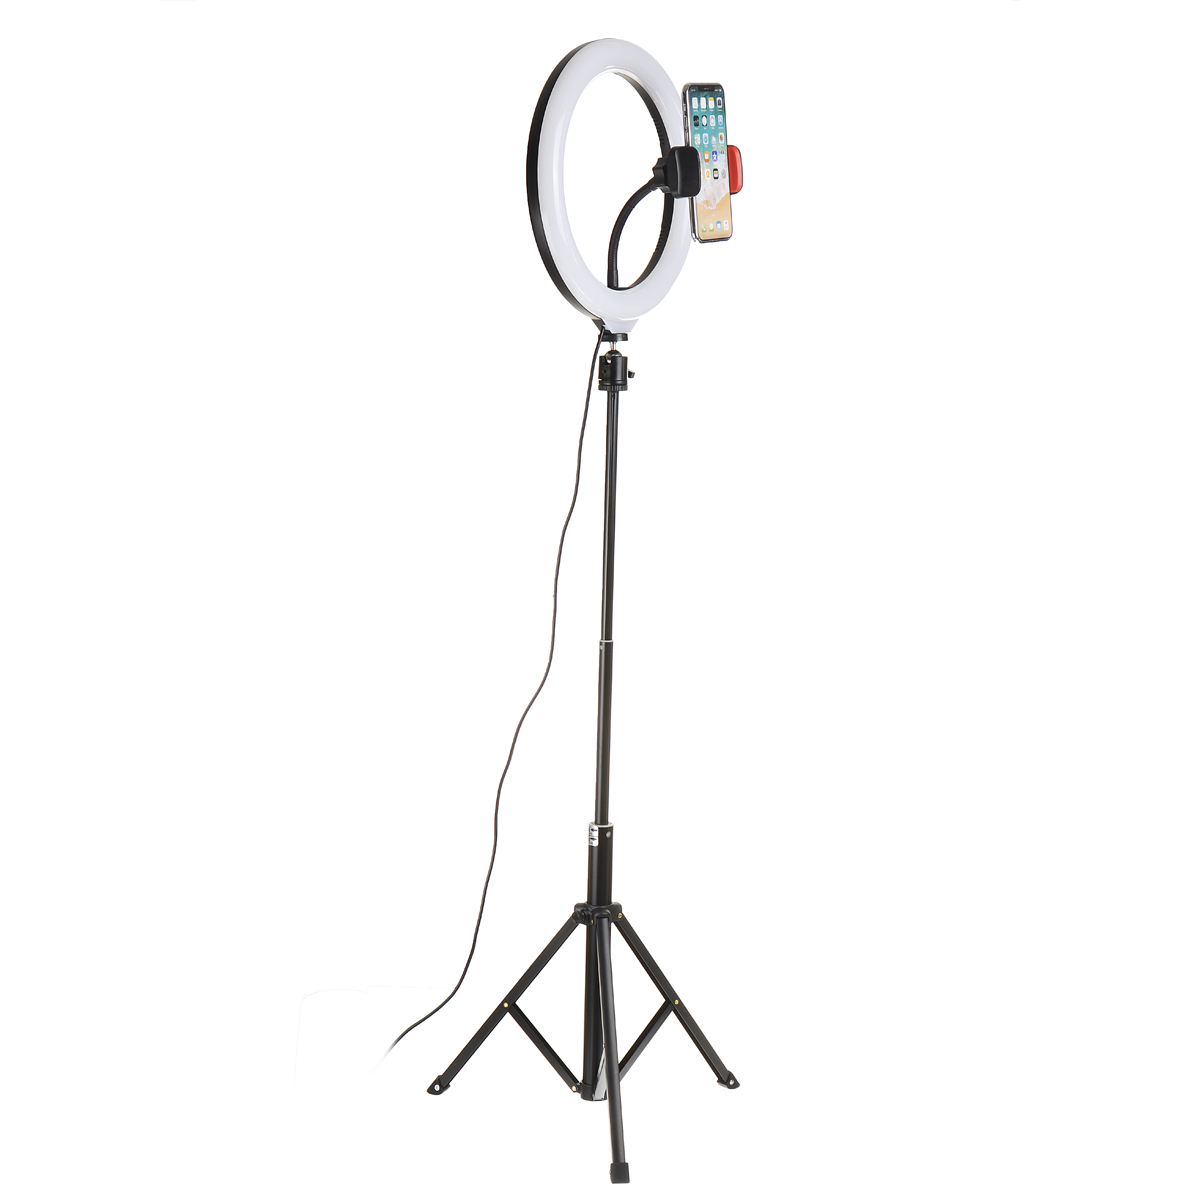 Bakeey-10inch-LED-Ring-Light-Portable-Telescopic-Tripod-Fill-Light-Dimmable-Flexible-Stand-Phone-Hol-1746941-1